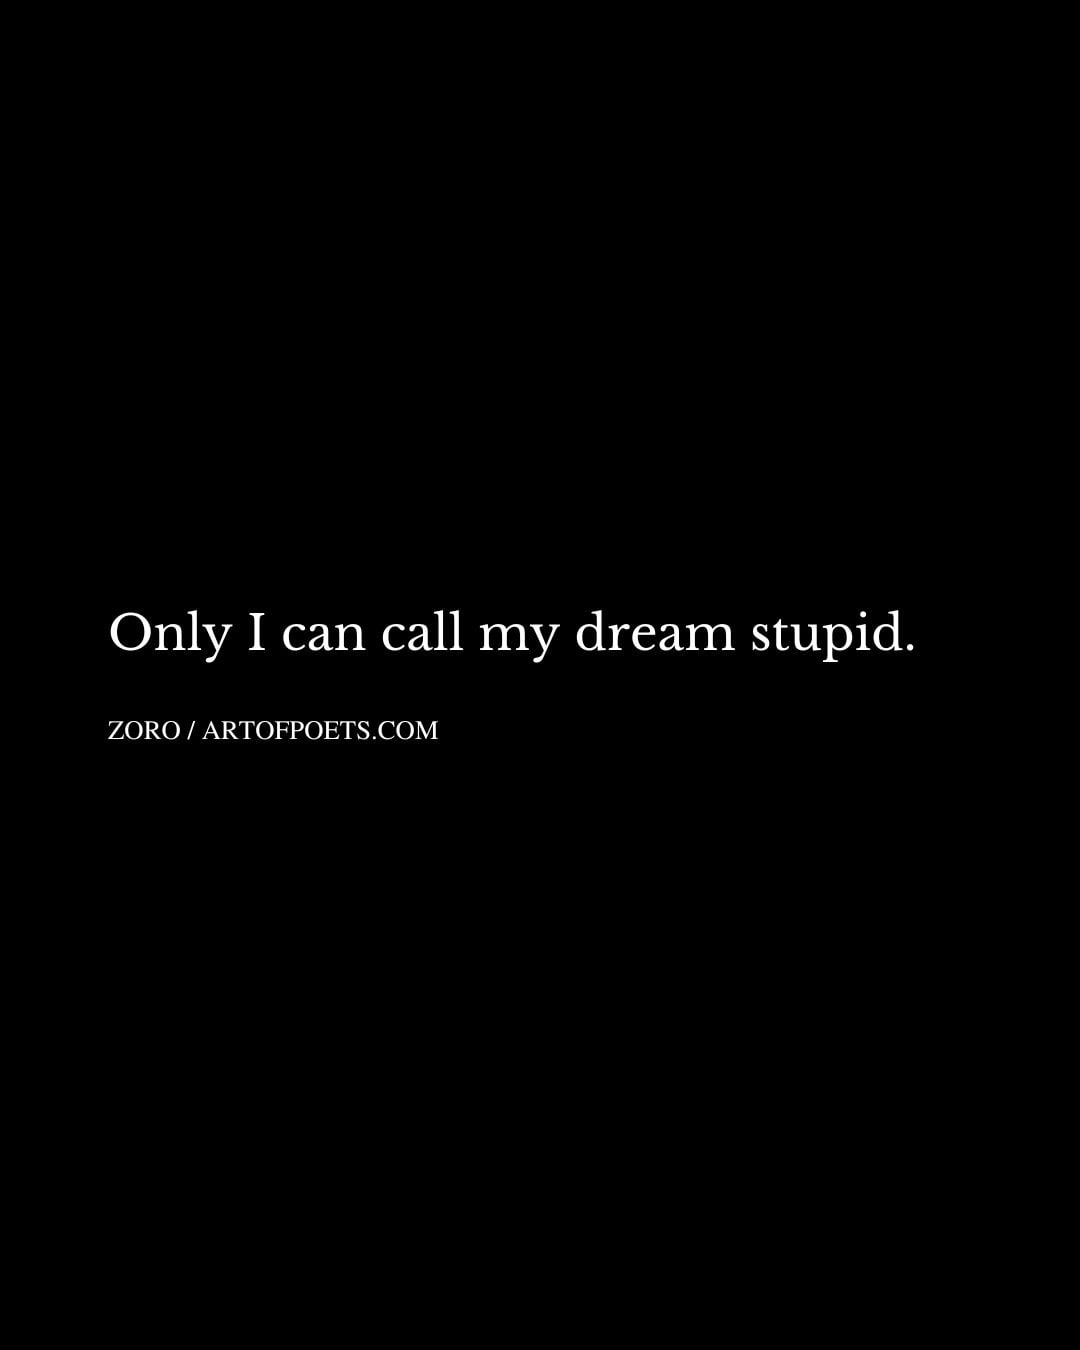 Only I can call my dream stupid